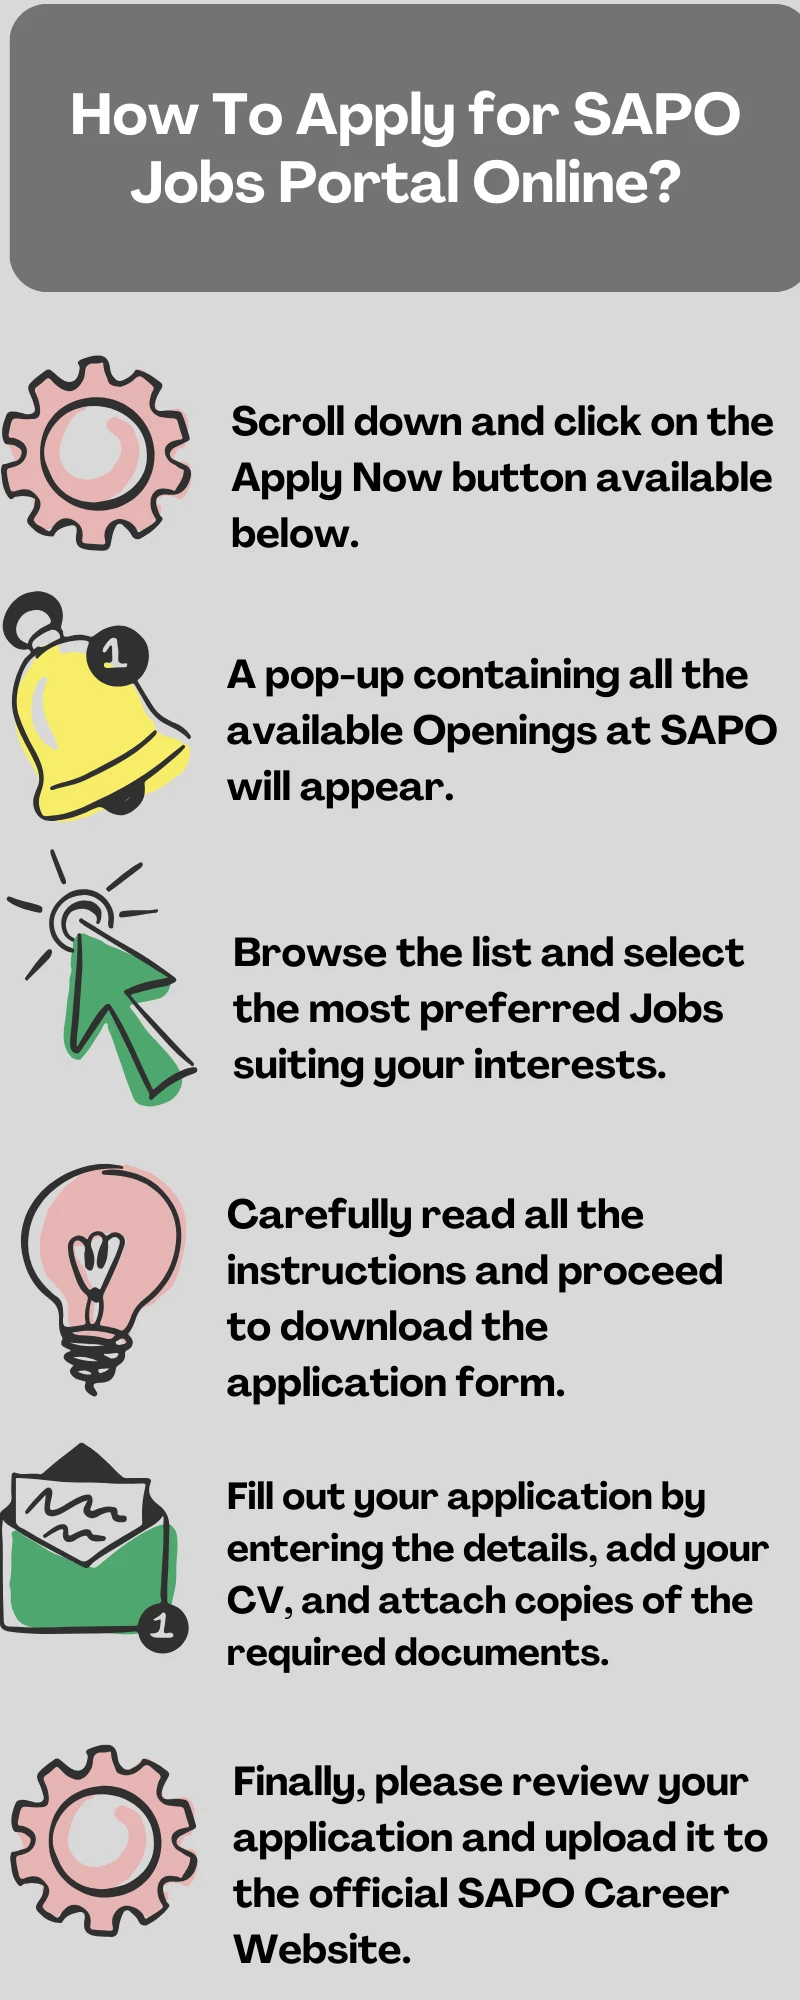 How To Apply for SAPO Jobs Portal Online? 